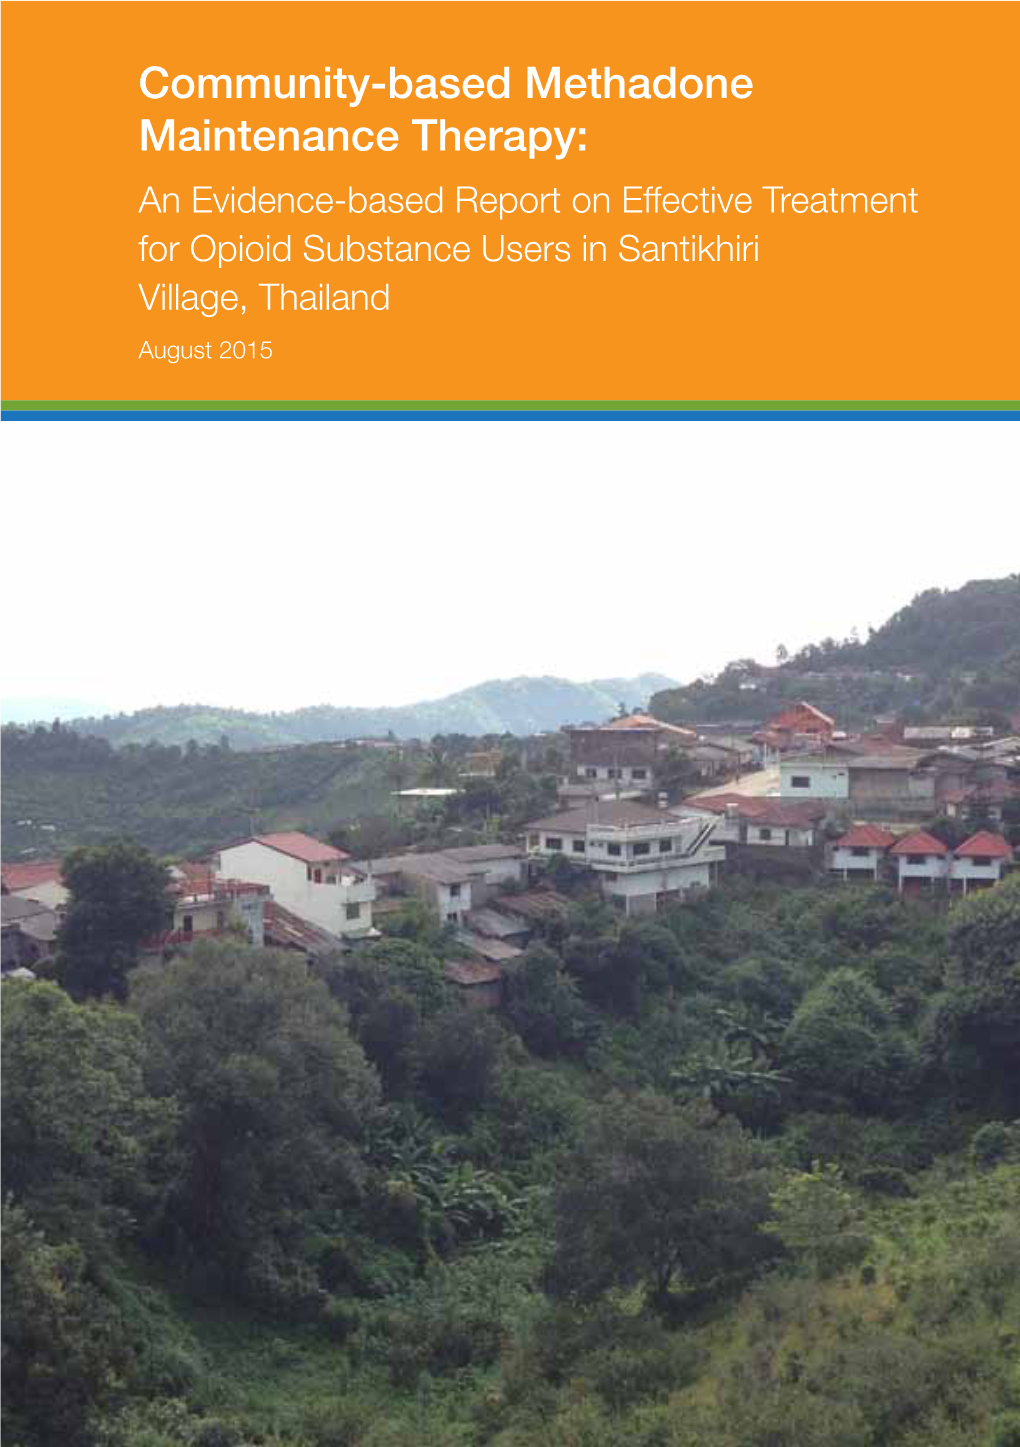 Community-Based Methadone Maintenance Therapy: an Evidence-Based Report on Effective Treatment for Opioid Substance Users in Santikhiri Village, Thailand August 2015